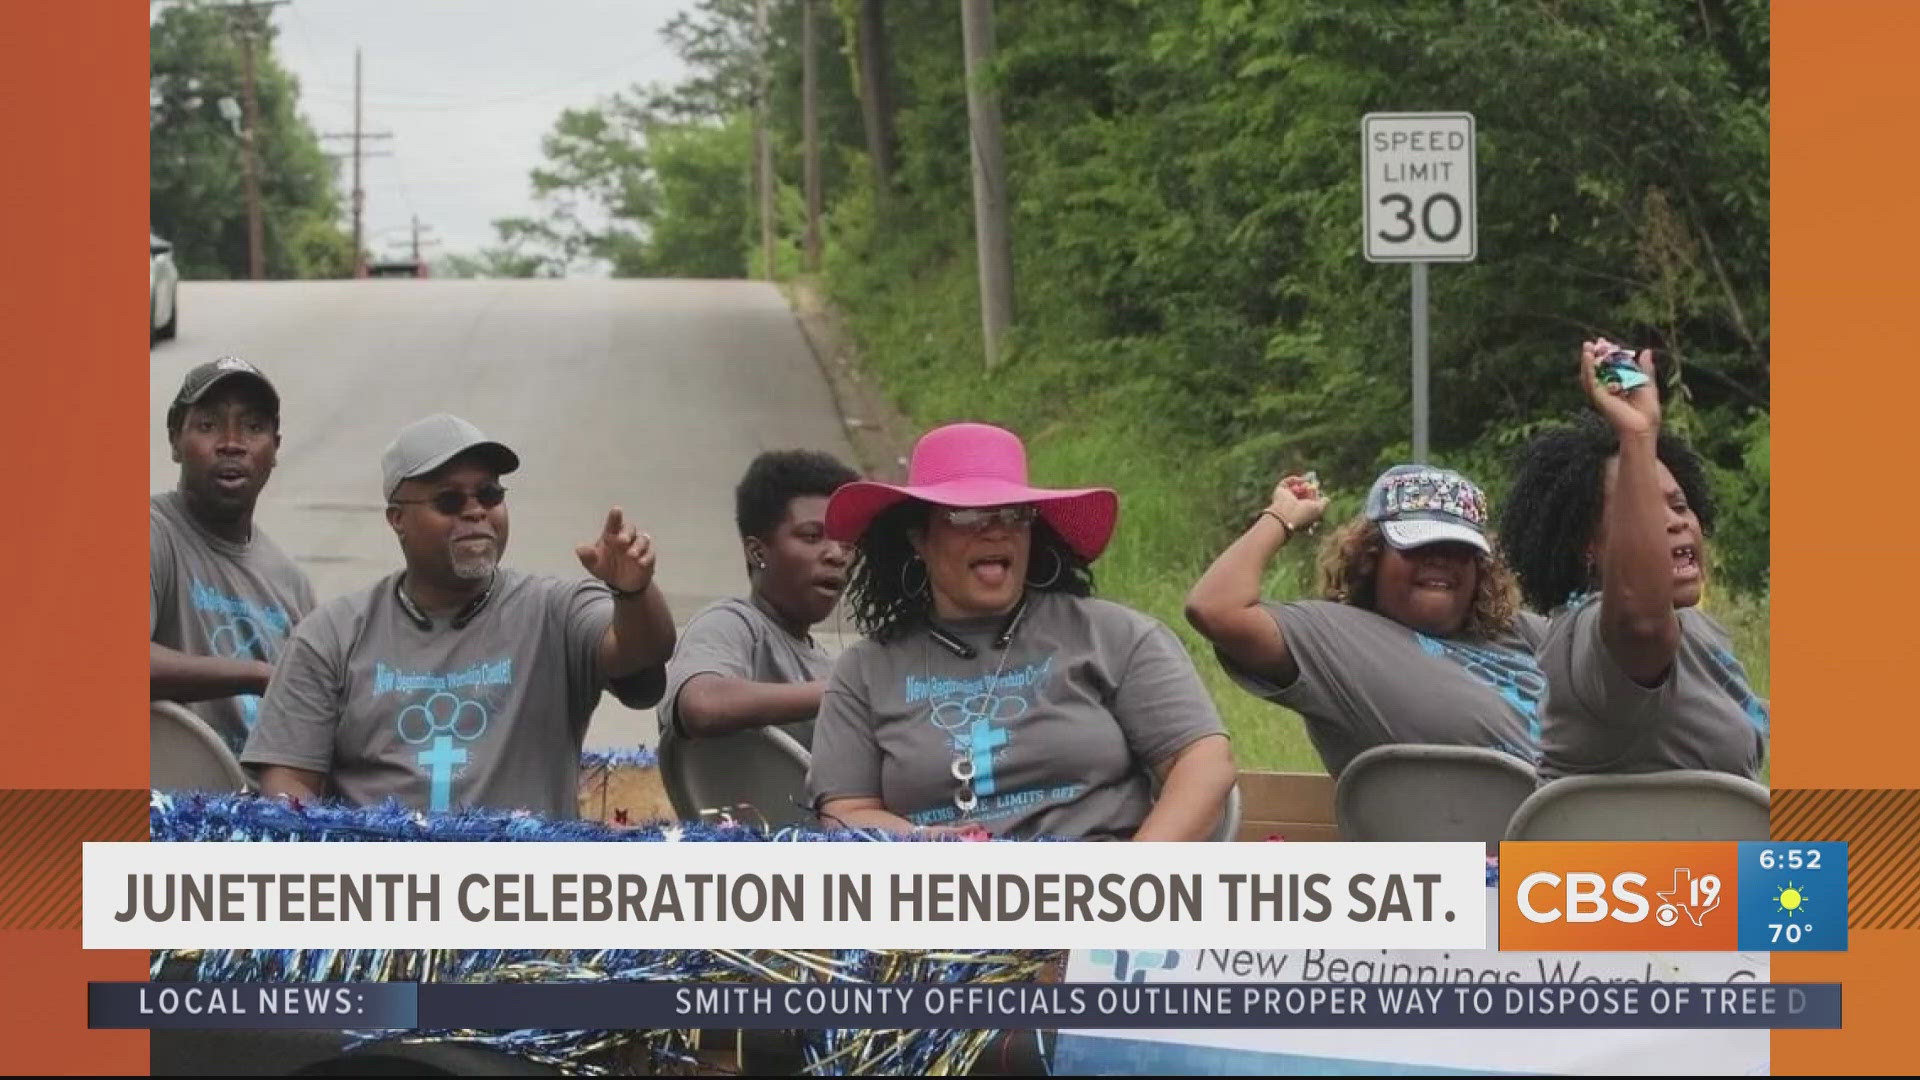 Juneteenth parade, celebration to be held in Henderson this weekend